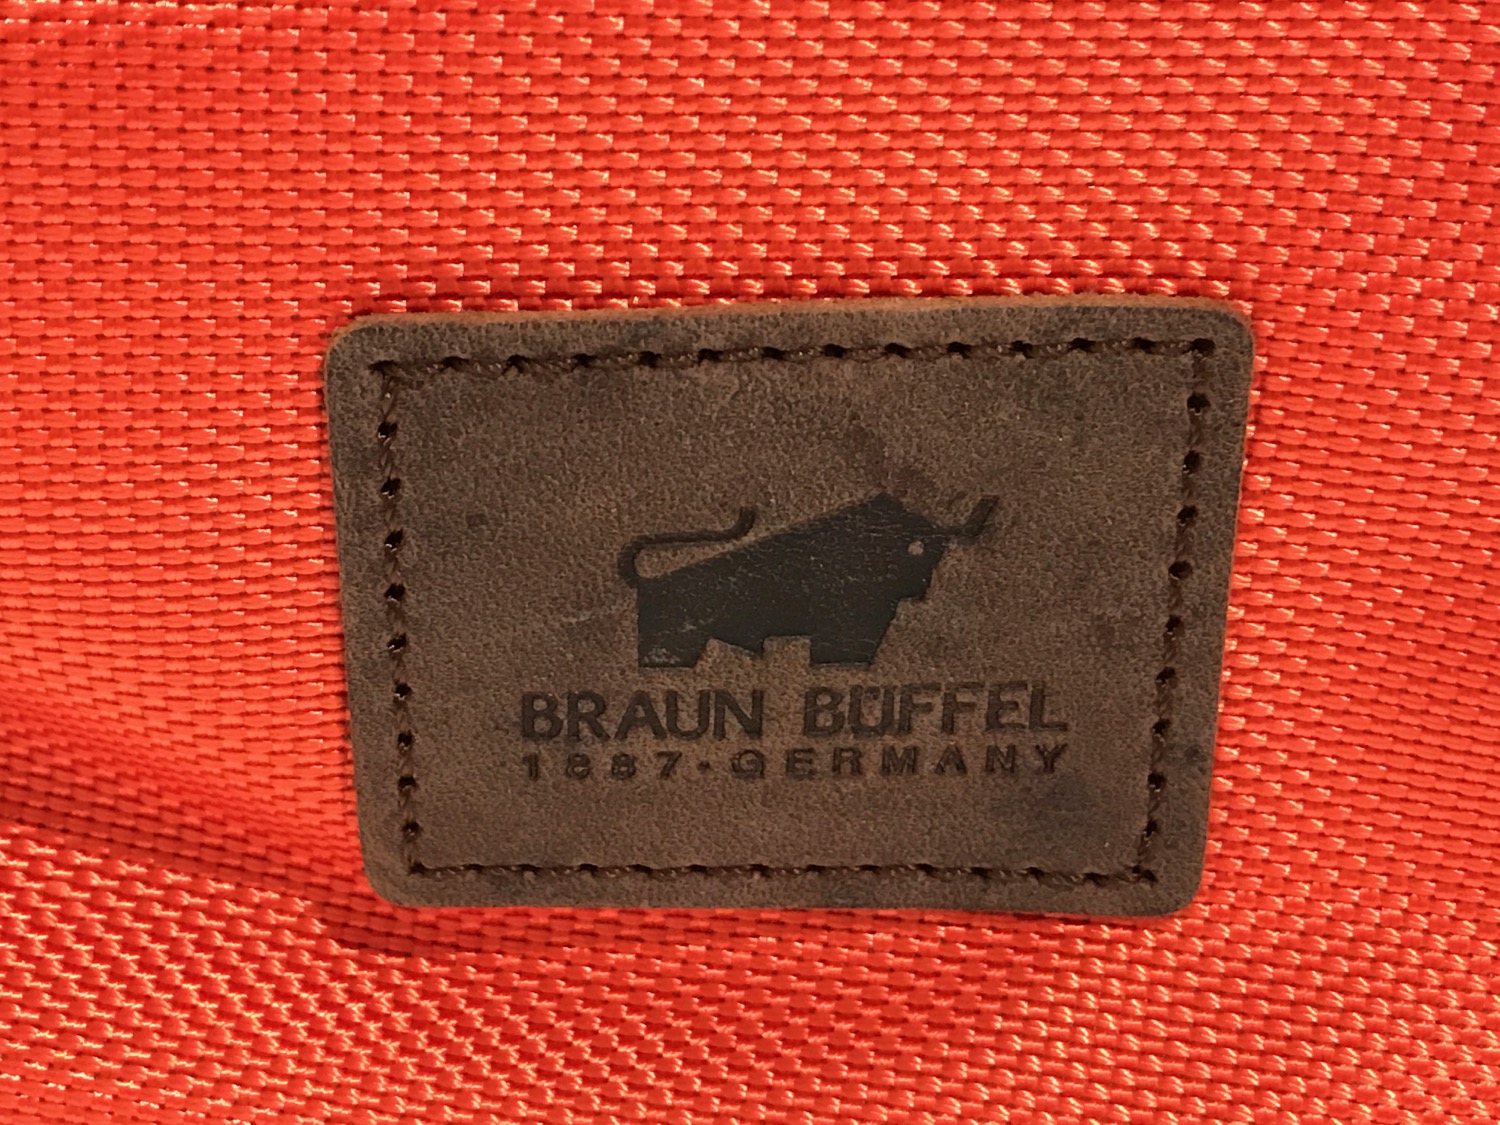 a leather label on a red fabric